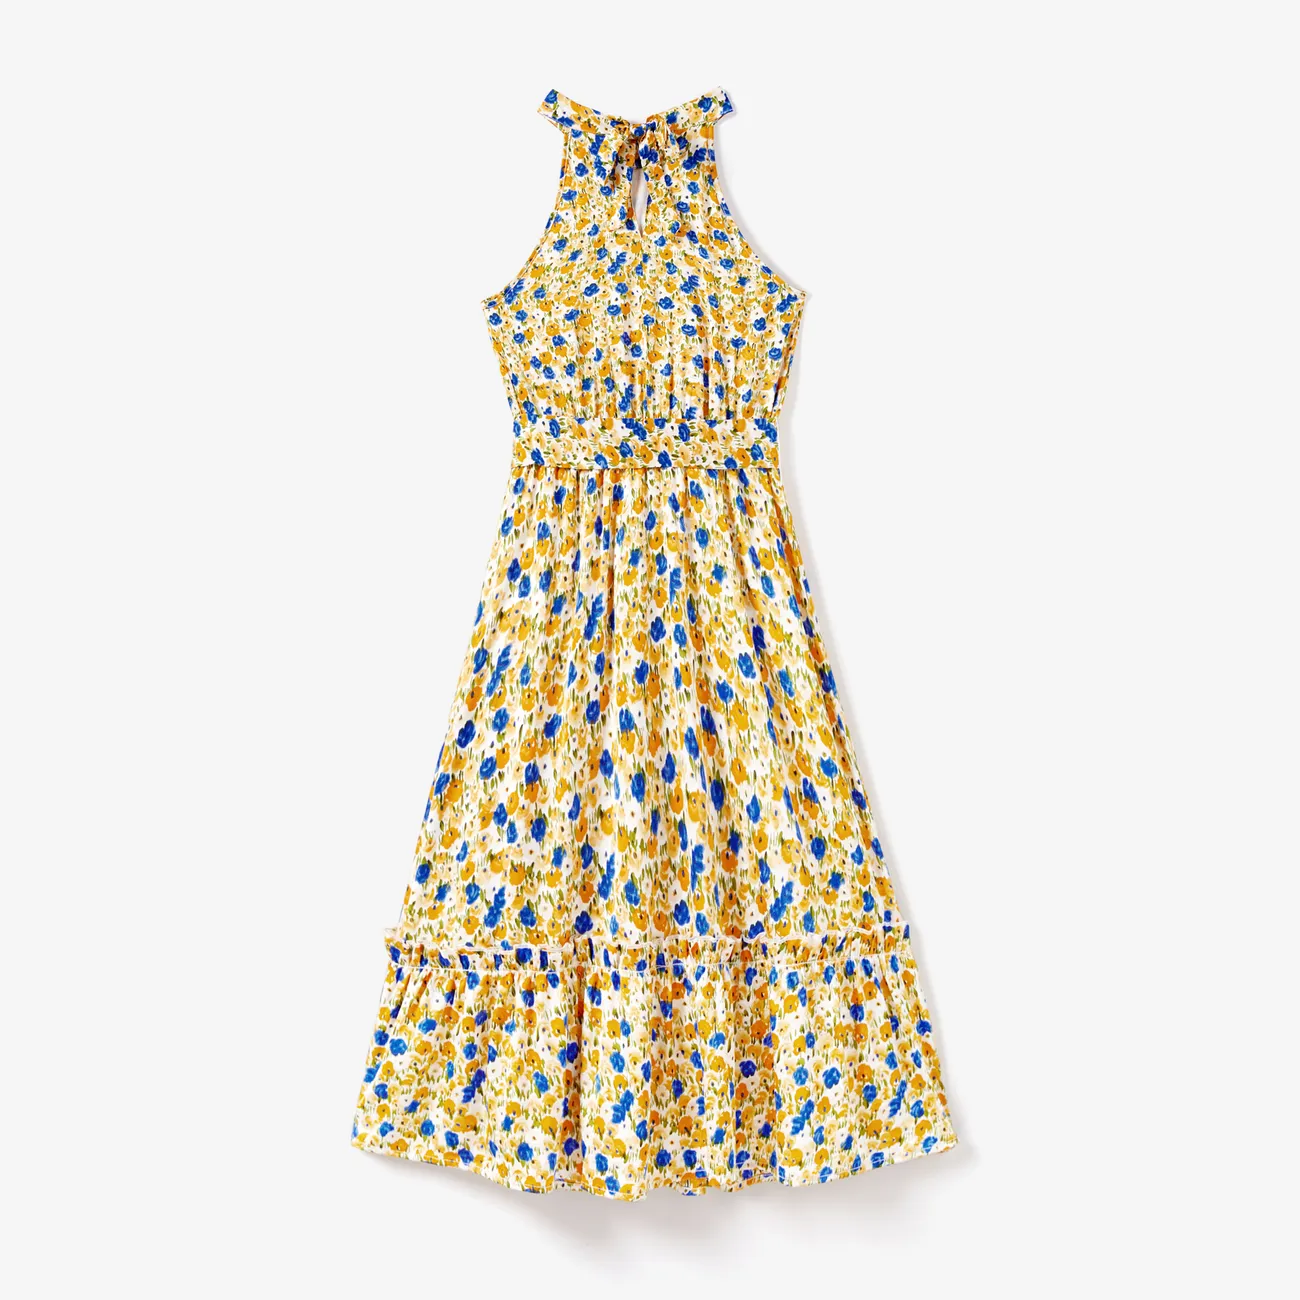 Family Matching Color Block Sunny Tee and Yellow Ditsy Floral High Neck Halter Sateen Dress Sets Yellow big image 1